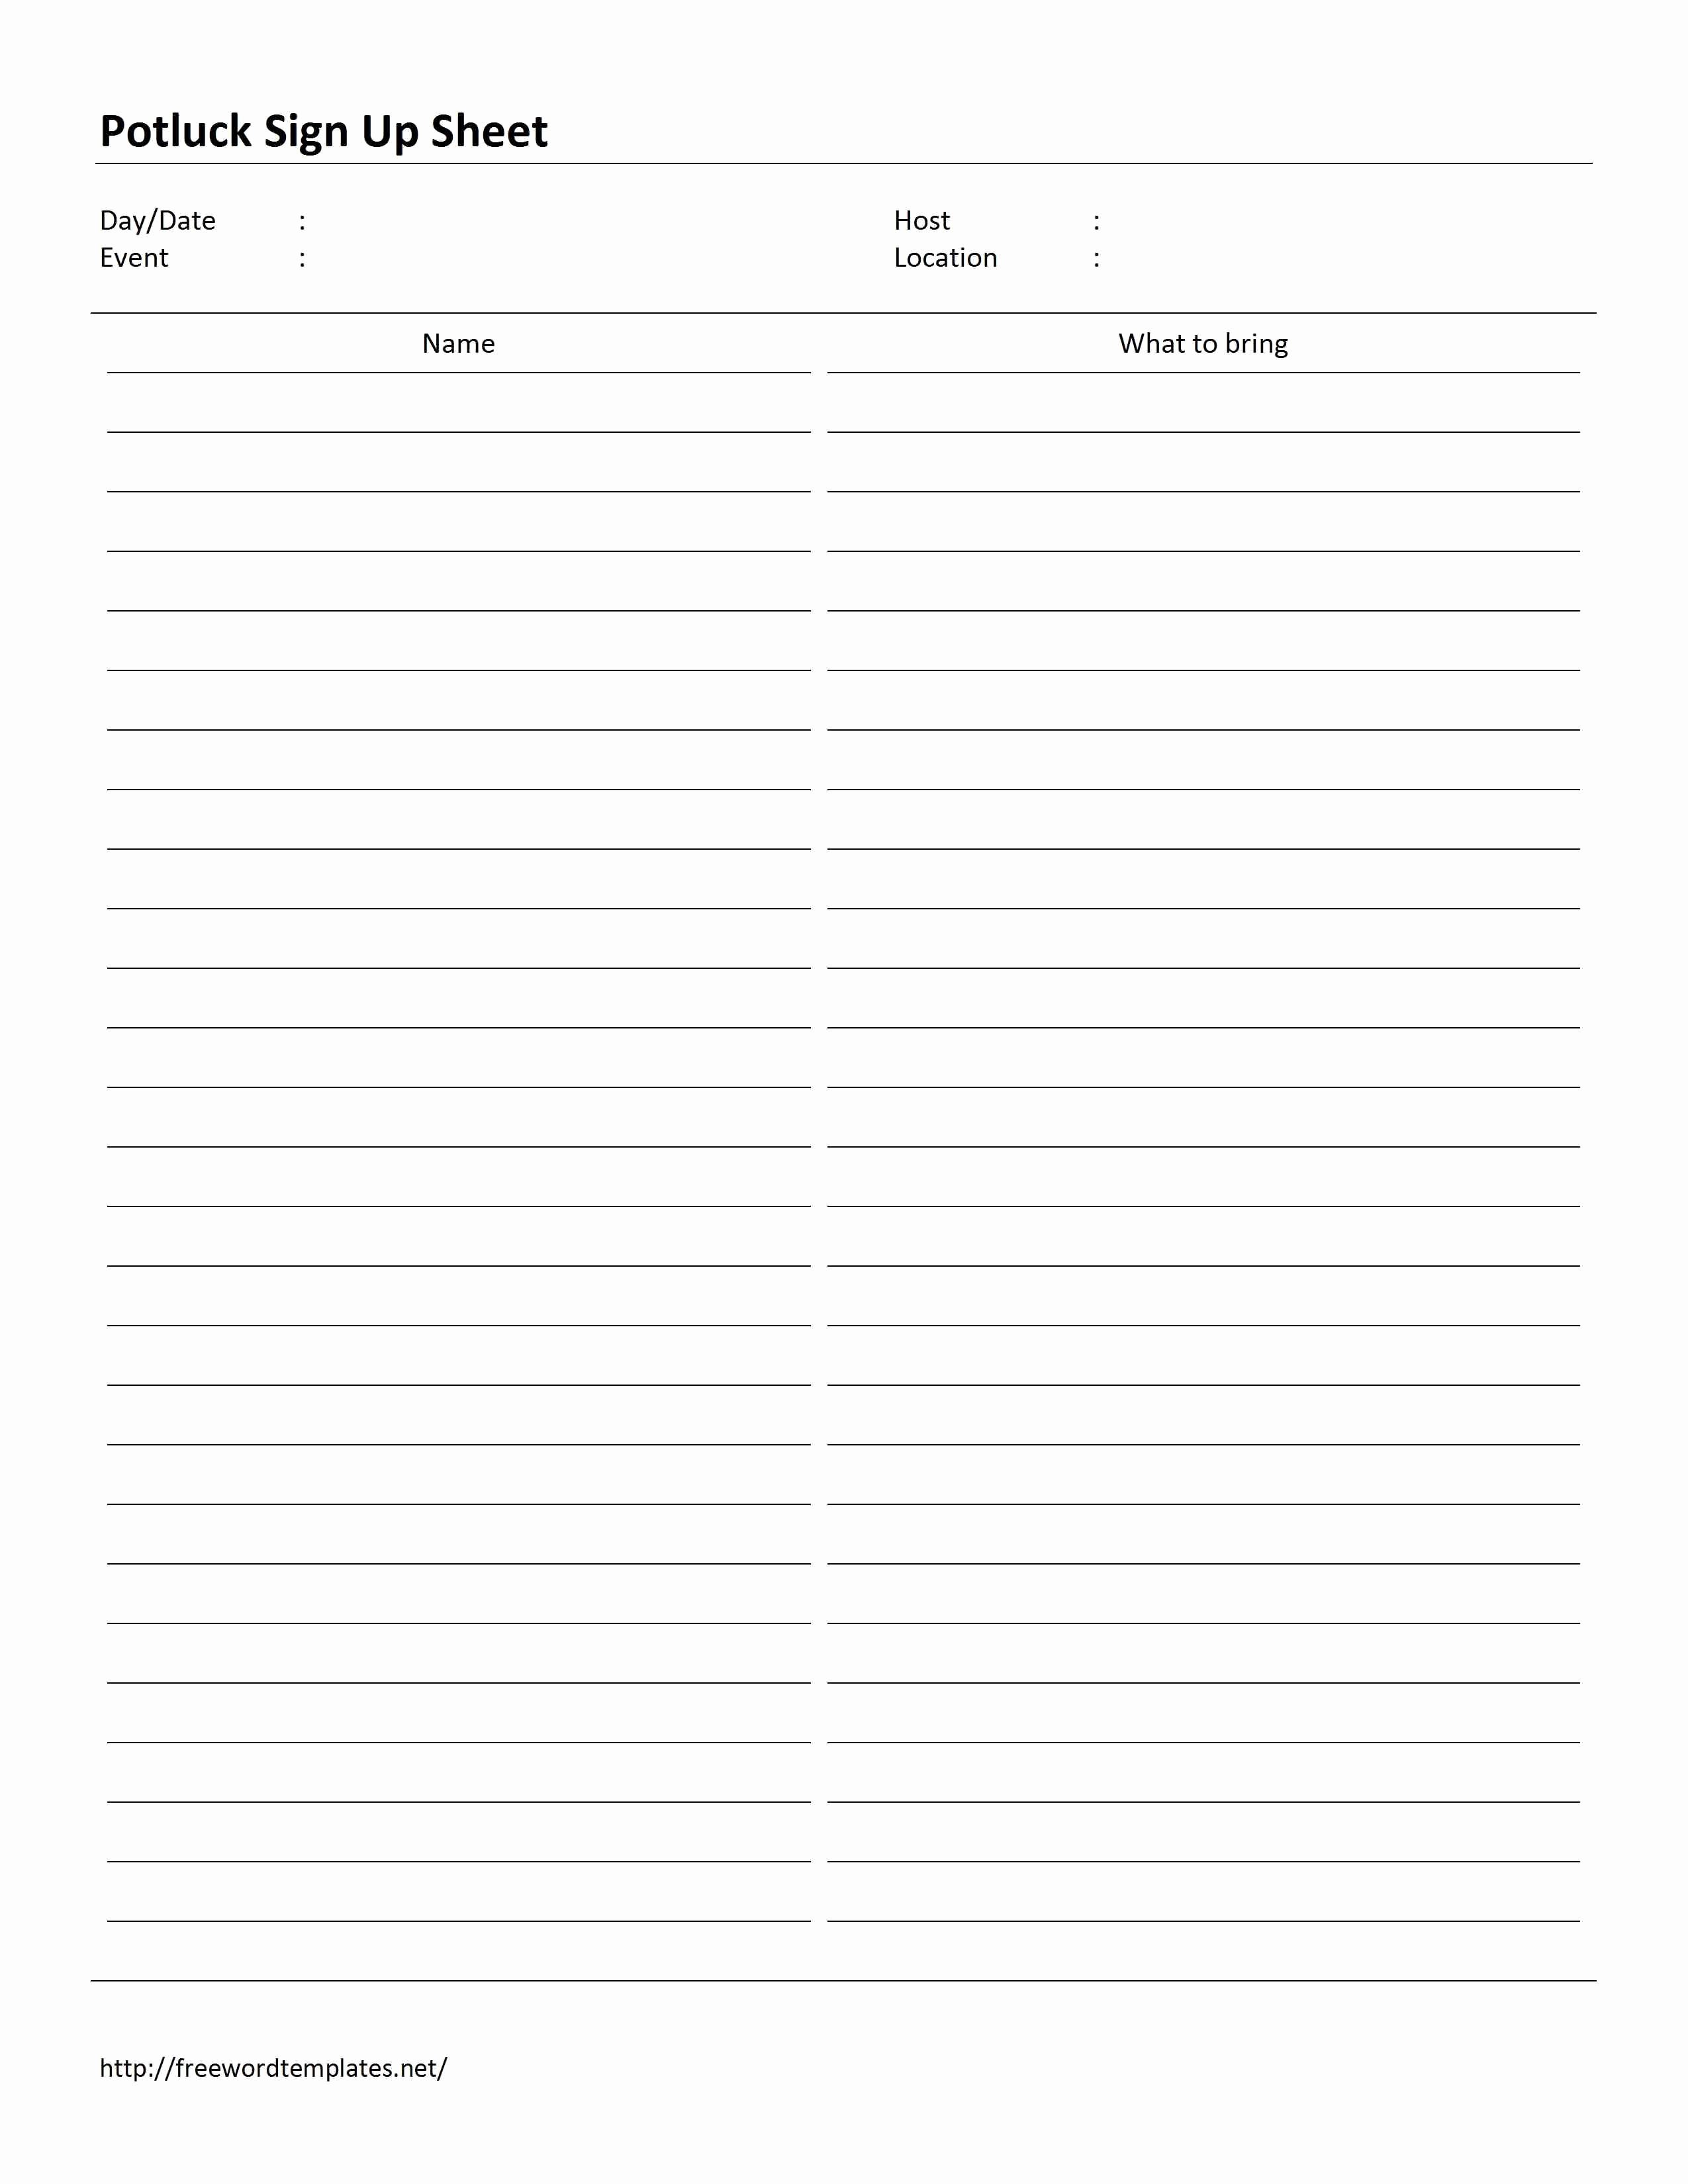 Sign Up Sheet Template Free New Potluck Sign Up Sheet Template Word Marketing